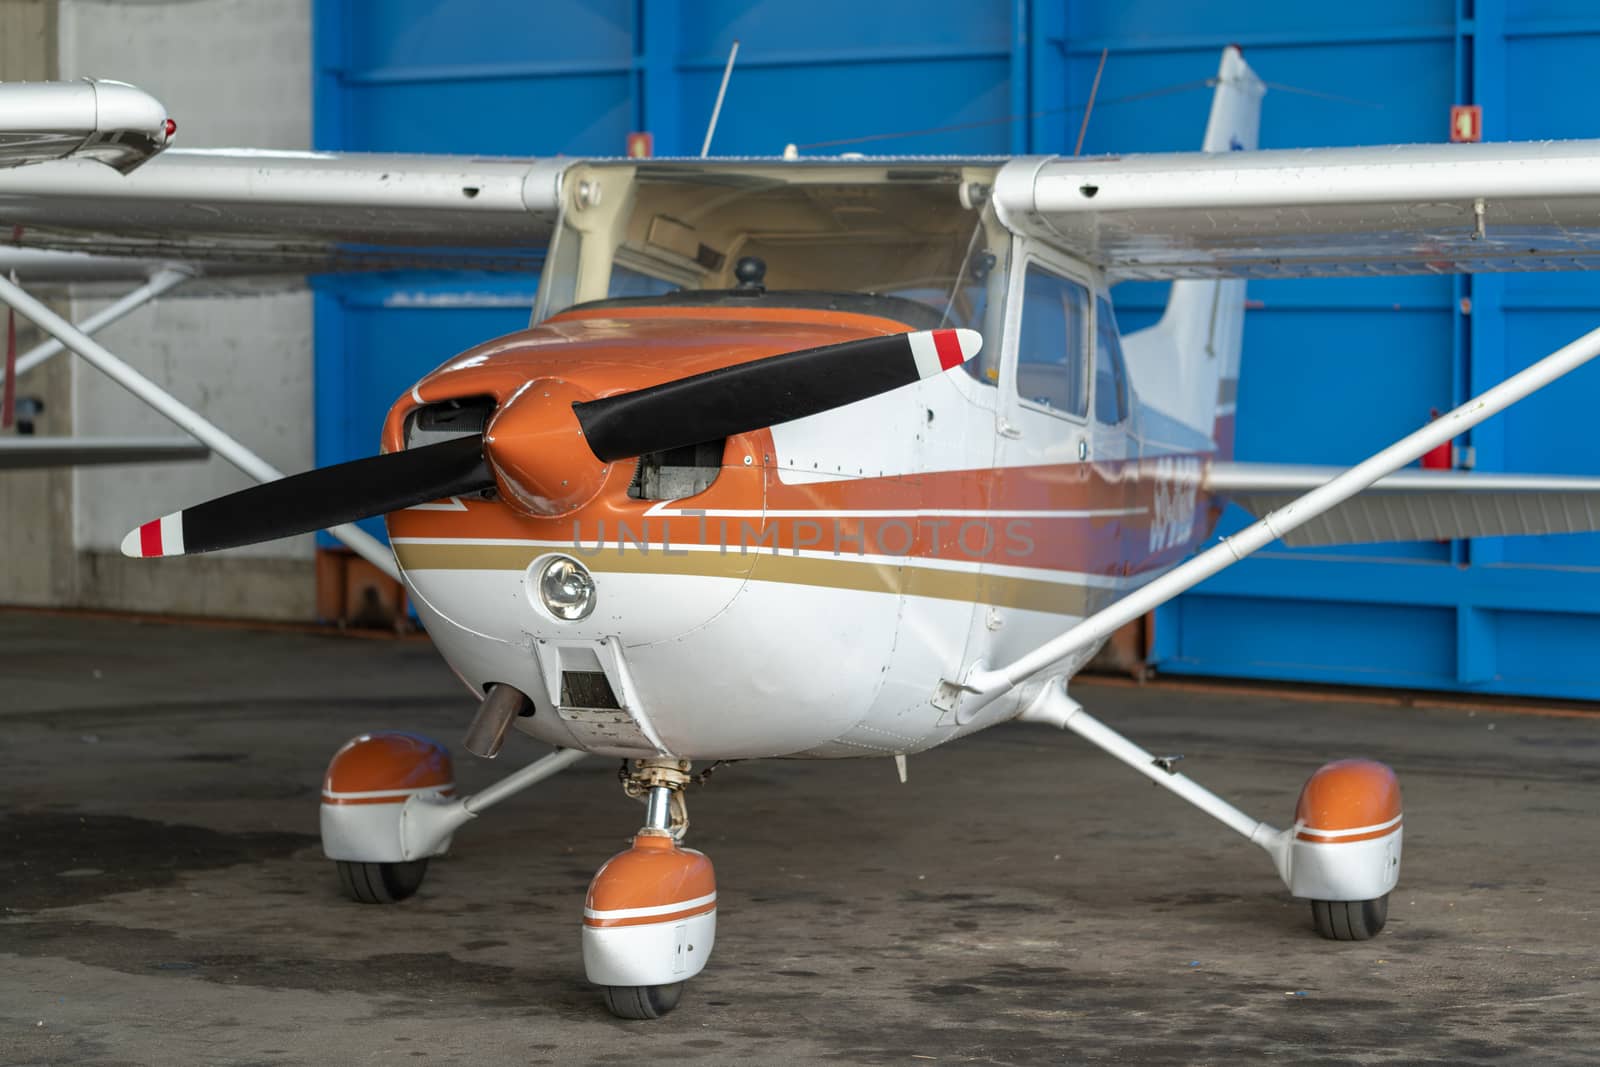 Small Sport Aircraft parked in hangar, close up. detail by asafaric